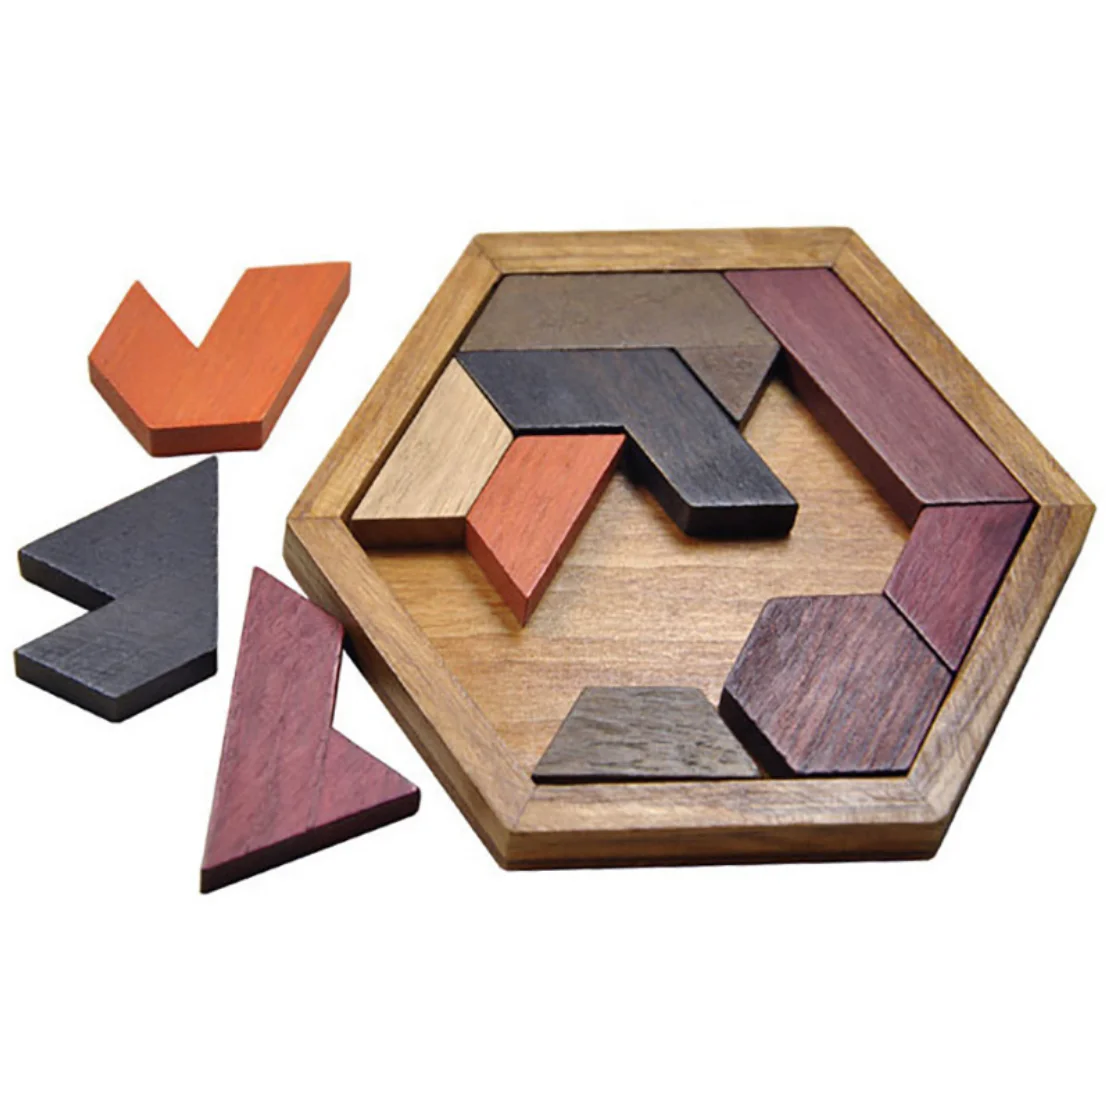 Wooden Puzzles Brain Teasers Toy Colorful Hexagon Graphical Early Educational IQ Game Montessori Toys STEM Gift for Kids Geometric Manipulative Shape Puzzle 